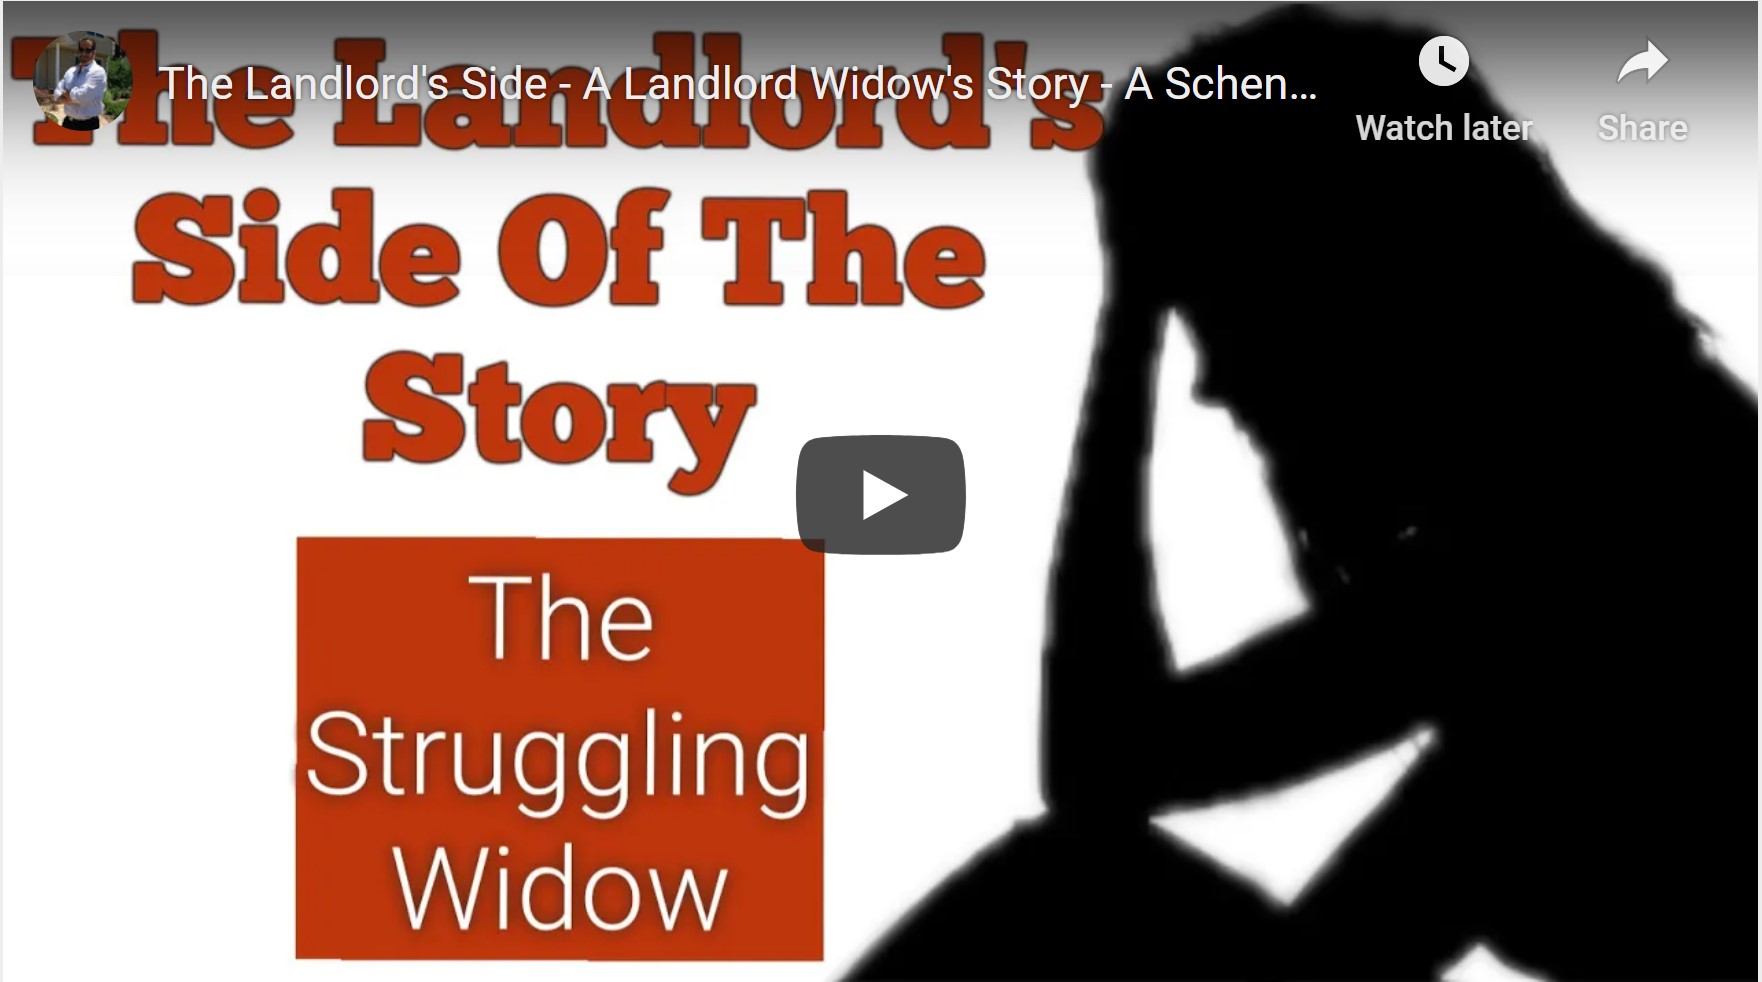 The Landlord's Side - A Landlord Widow's Story - A Schenectady Landlord